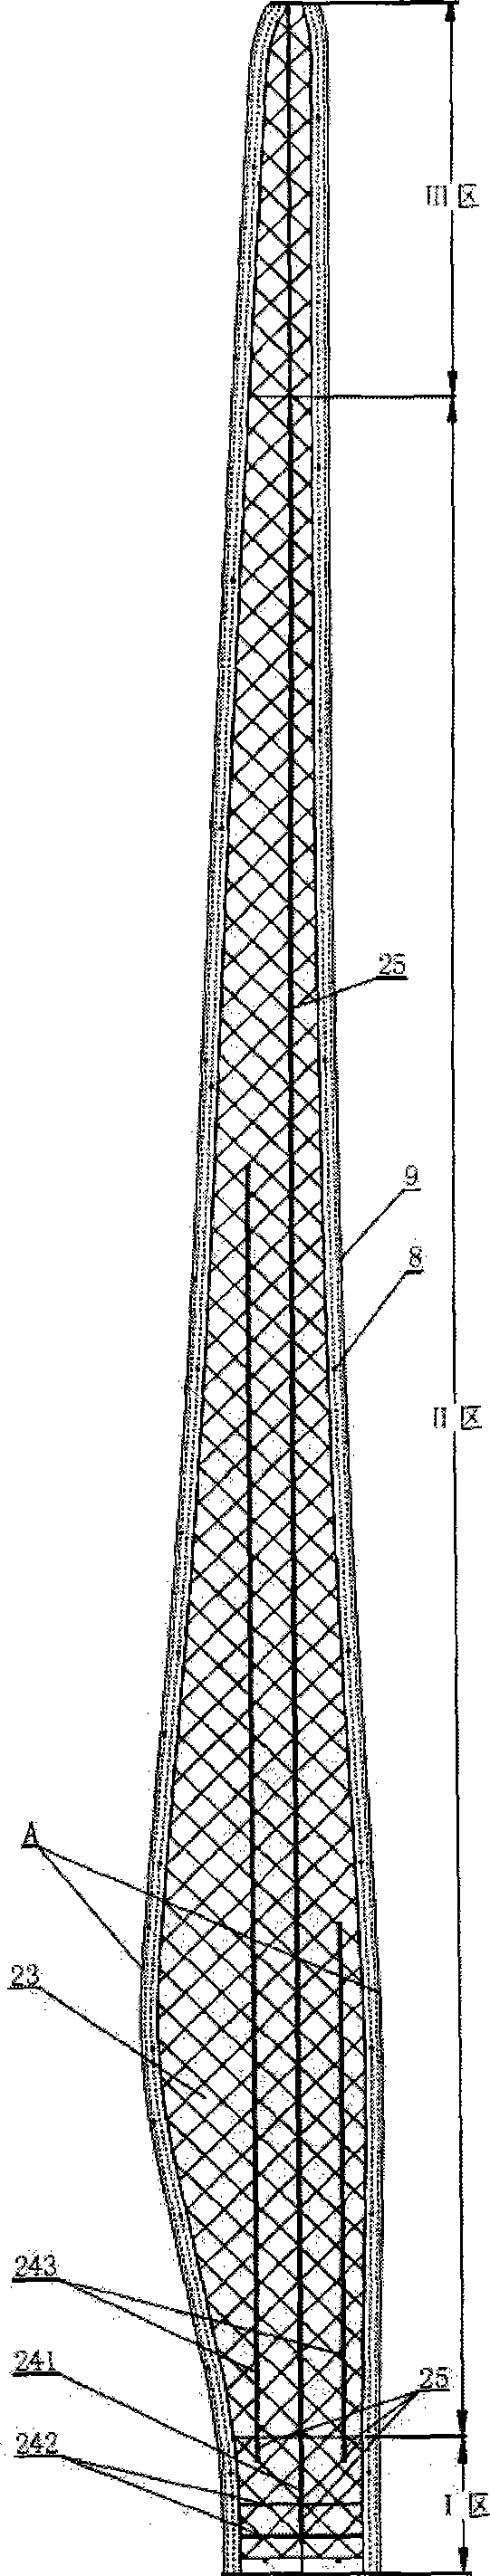 Megawatt level composite material wind electricity blade vacuum guiding and forming technique